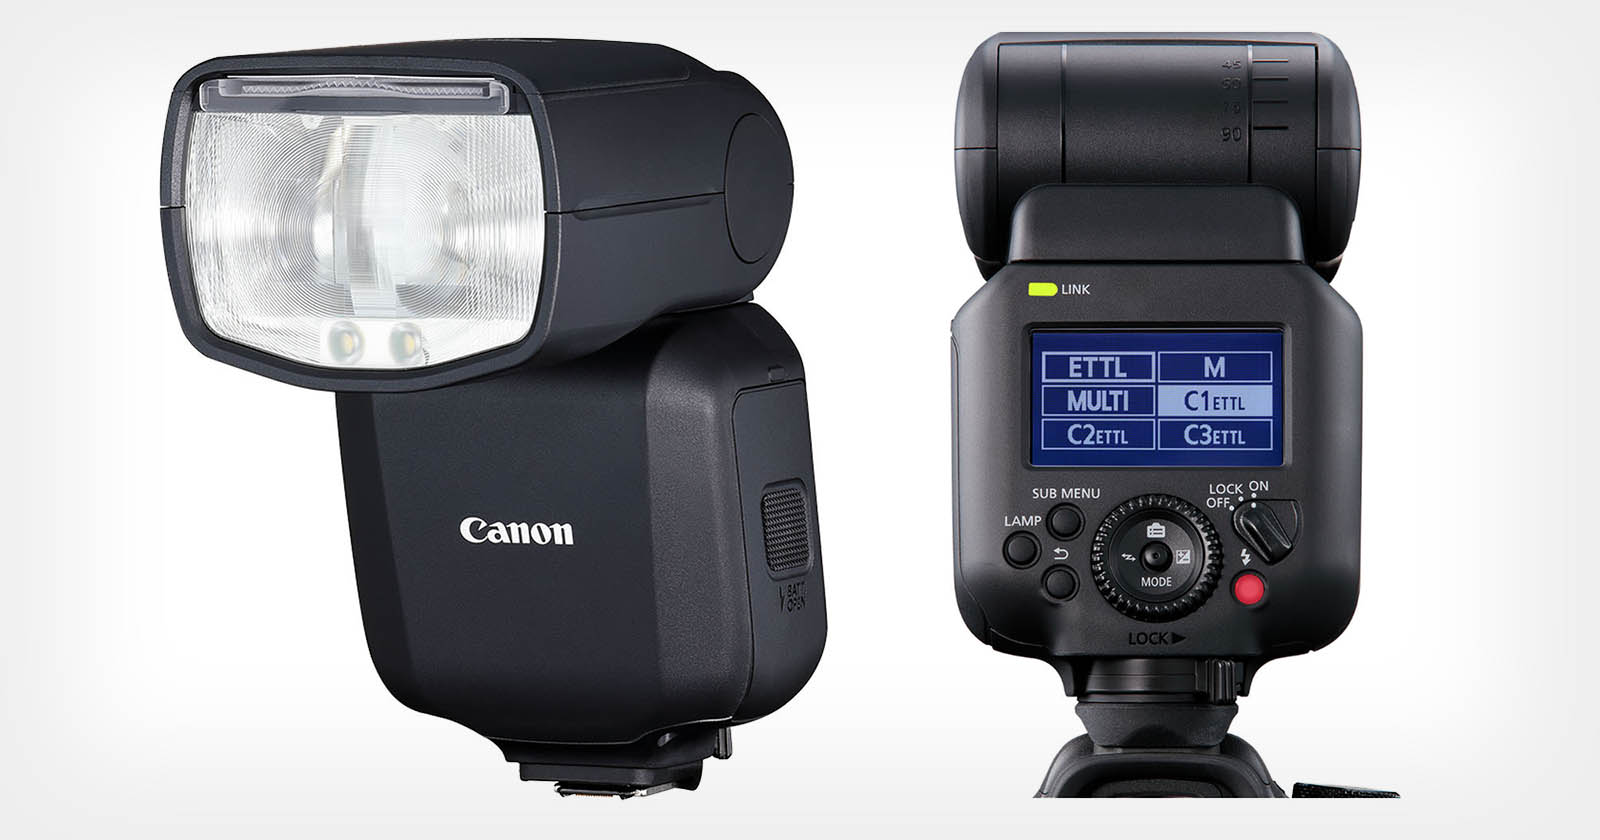 enfocar Boda inoxidable Canon's New Speedlite EL-5 is the First Flash Made for EOS R Mirrorless |  PetaPixel